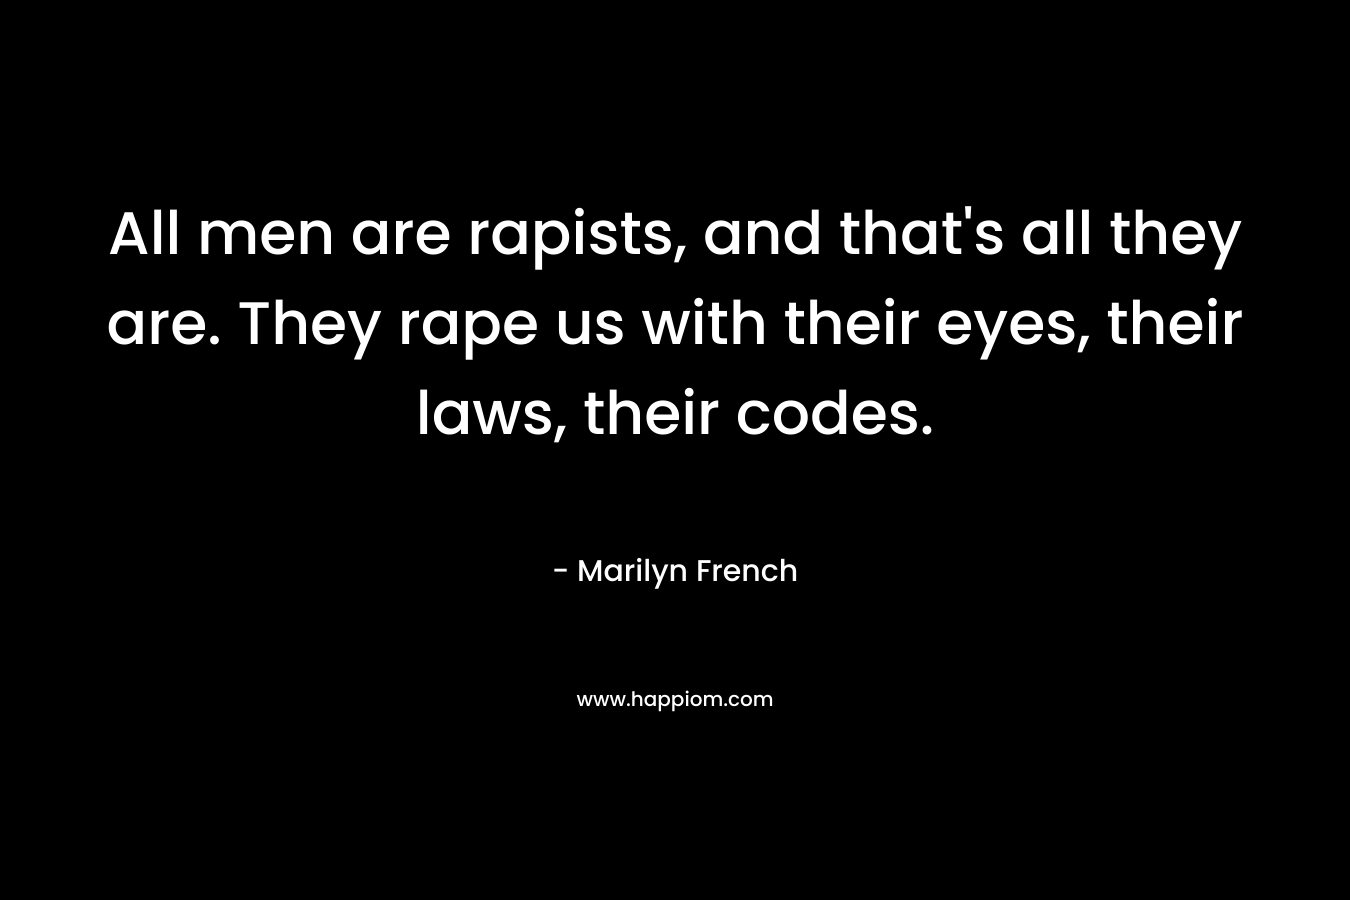 All men are rapists, and that’s all they are. They rape us with their eyes, their laws, their codes. – Marilyn French